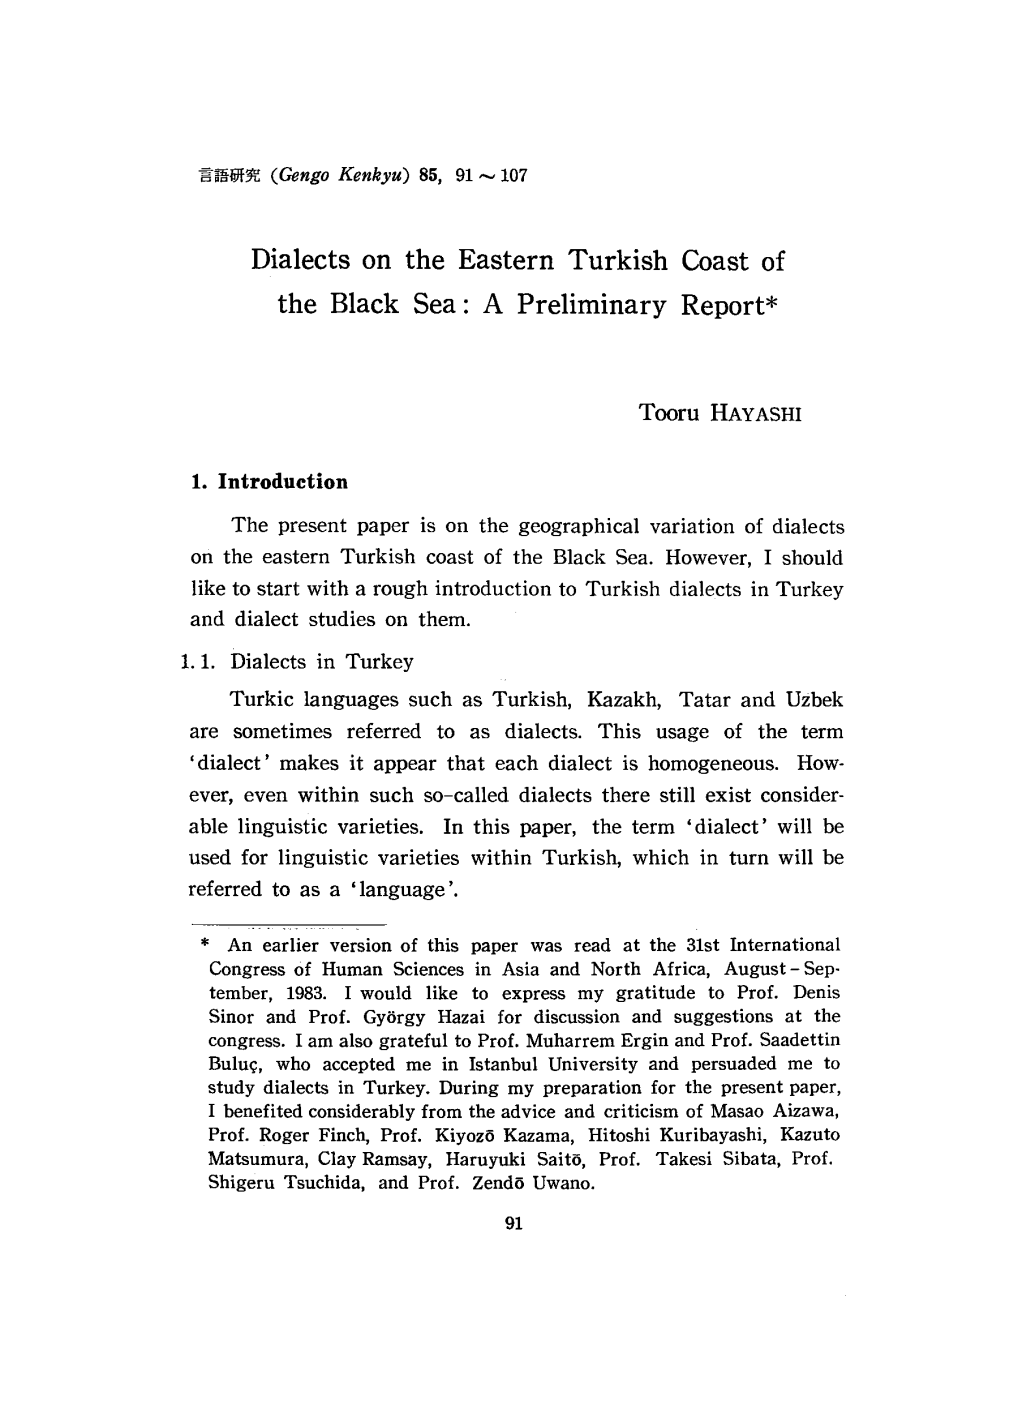 Dialects on the Eastern Turkish Coast of the Black Sea: a Preliminary Report*